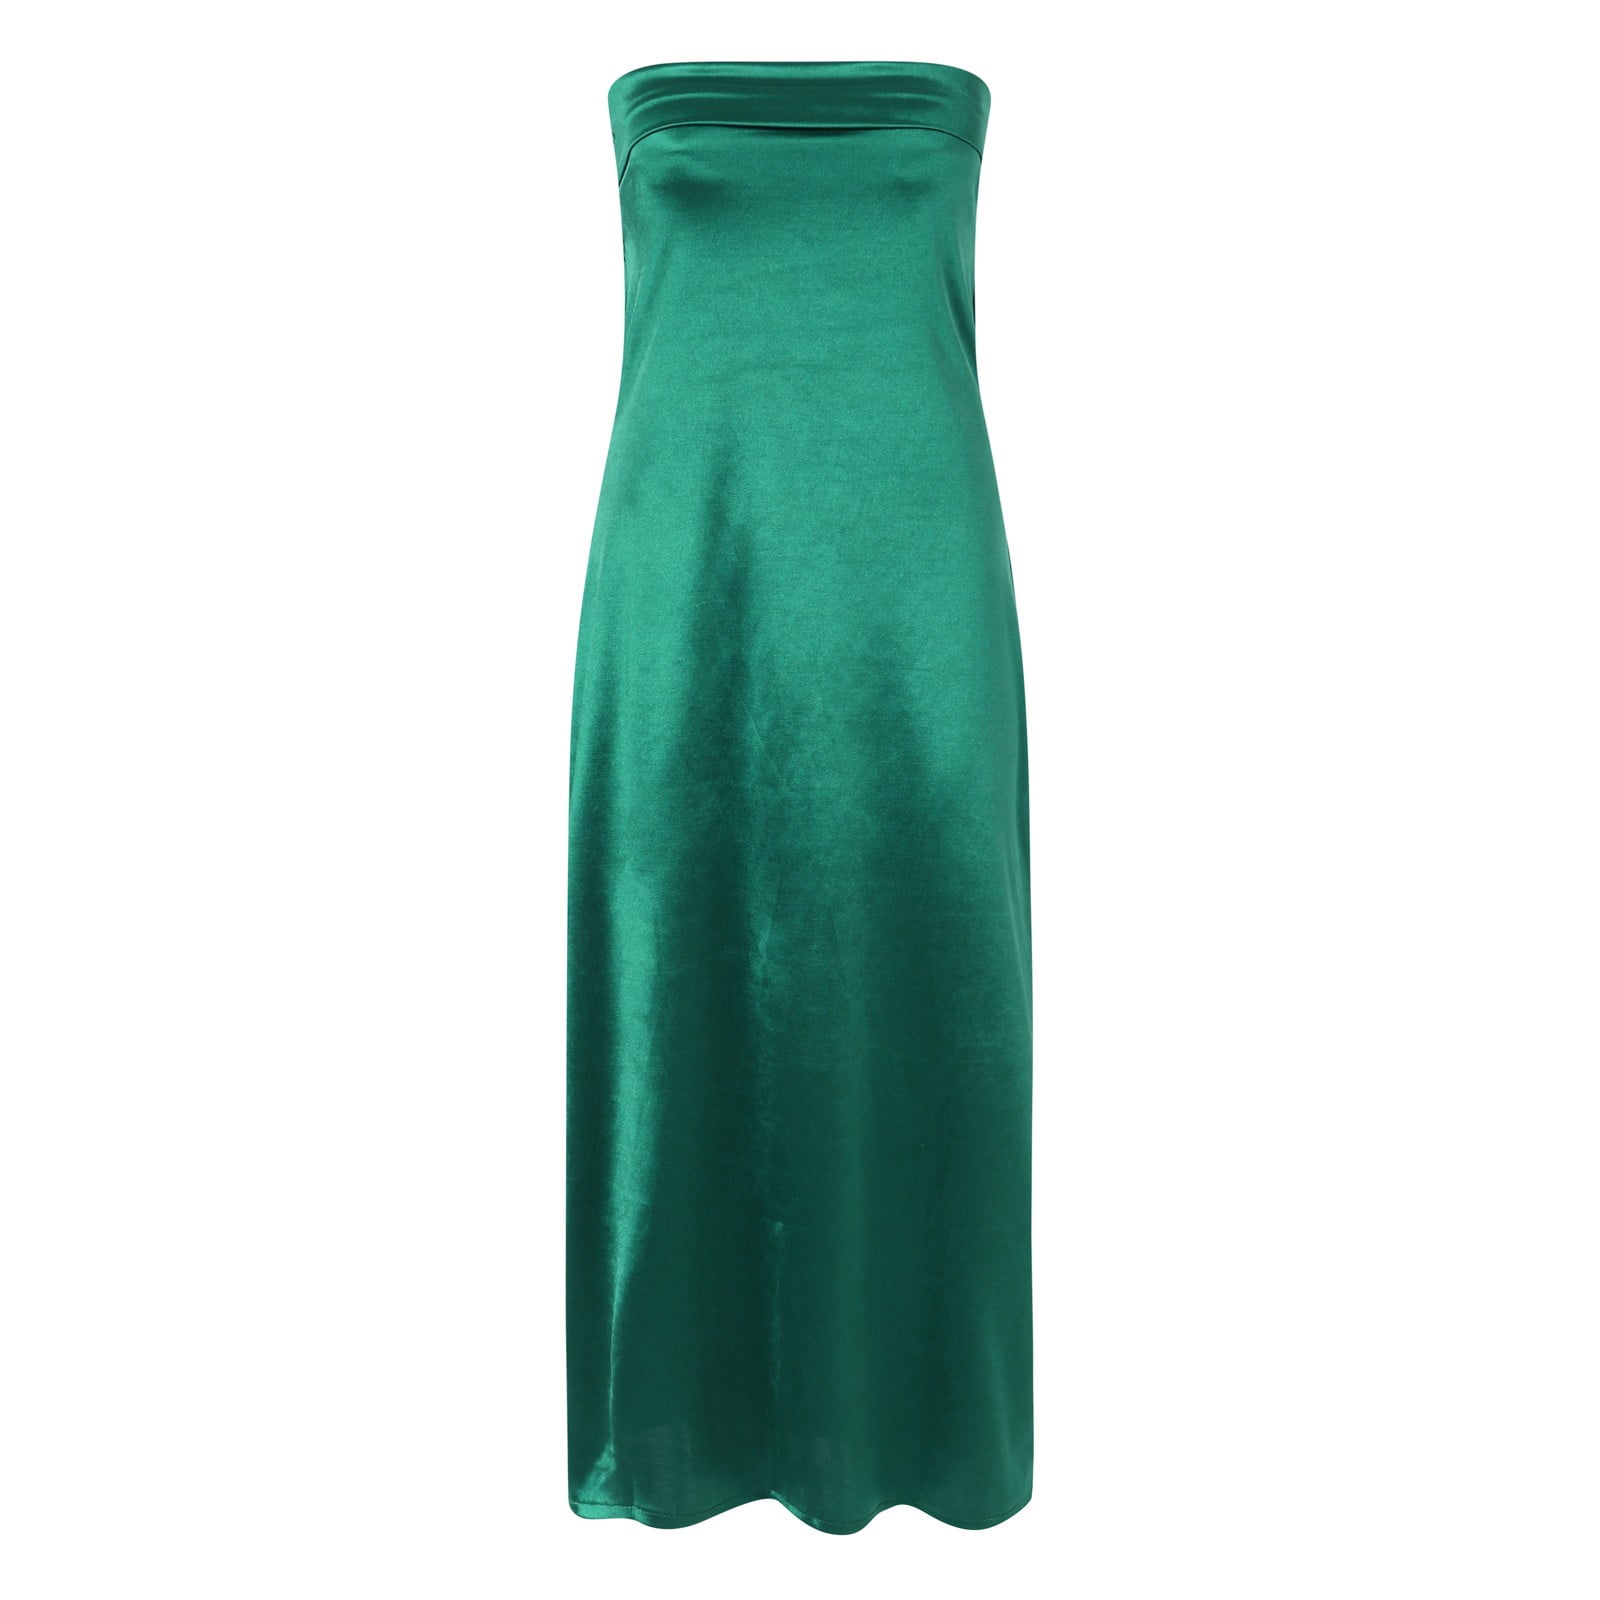 Women's COS Party dress, size 38 (Green) | Emmy